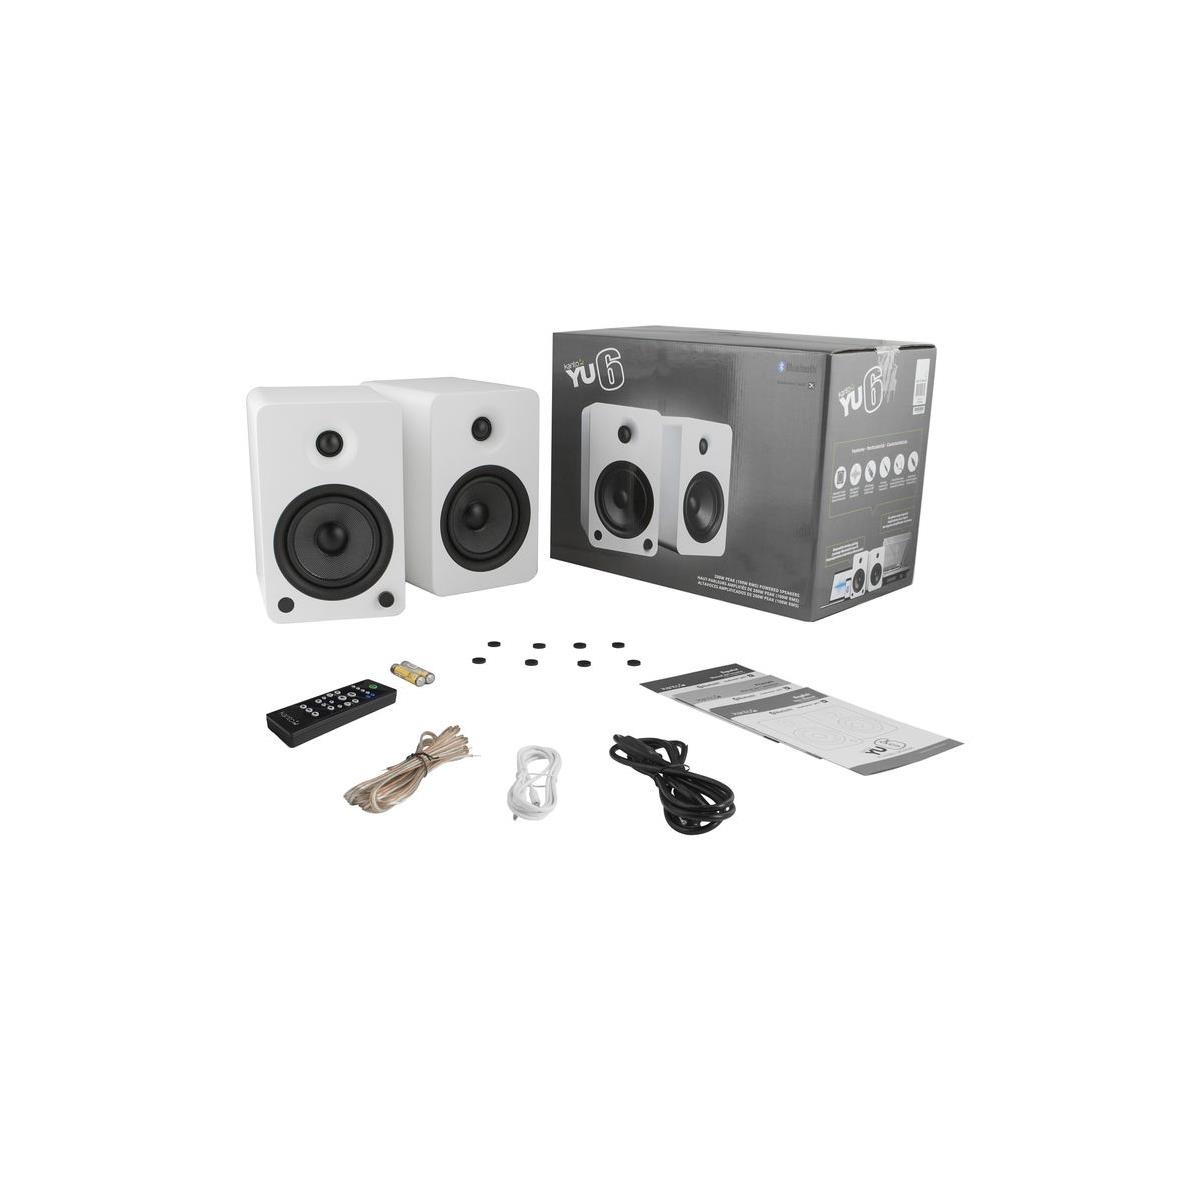 Kanto YU6 Powered Speakers with Bluetooth and Phono Preamp (Matte White $296.98, Bamboo $316.78) @ Adorama